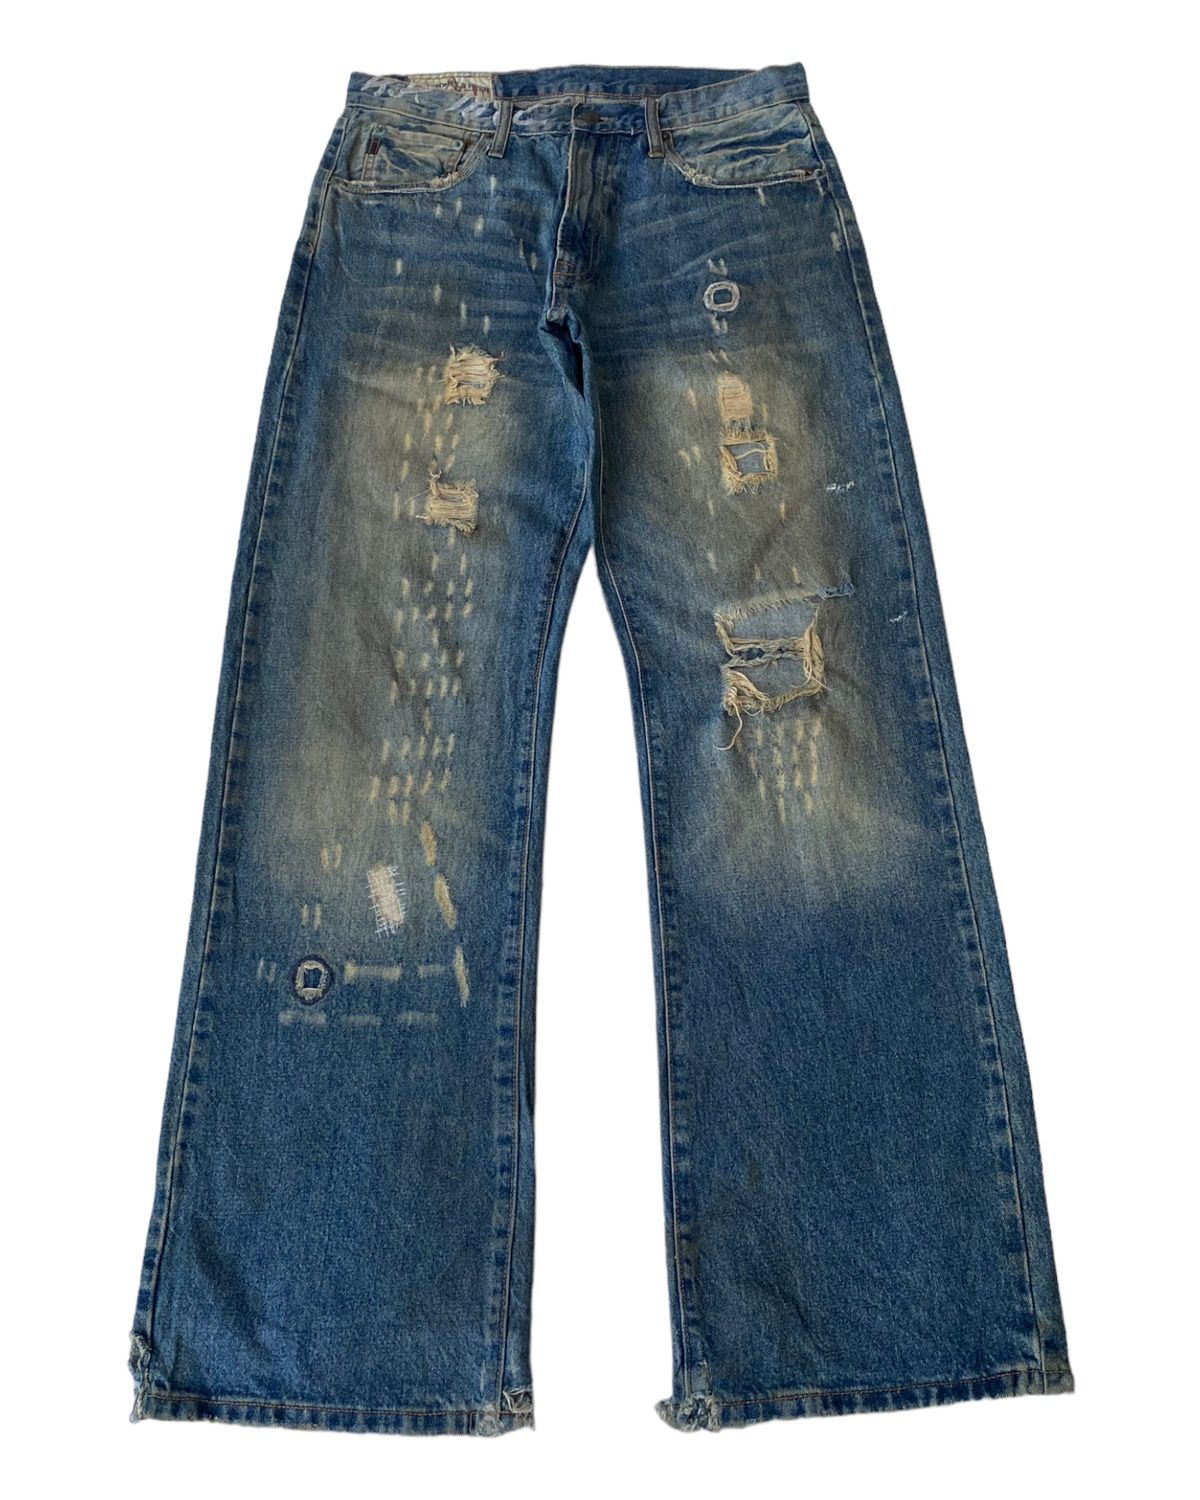 🔥FLARE JEANS RUSTY BAGGY ABERCROMBIE & FITCH DISTRESS DENIM - 8